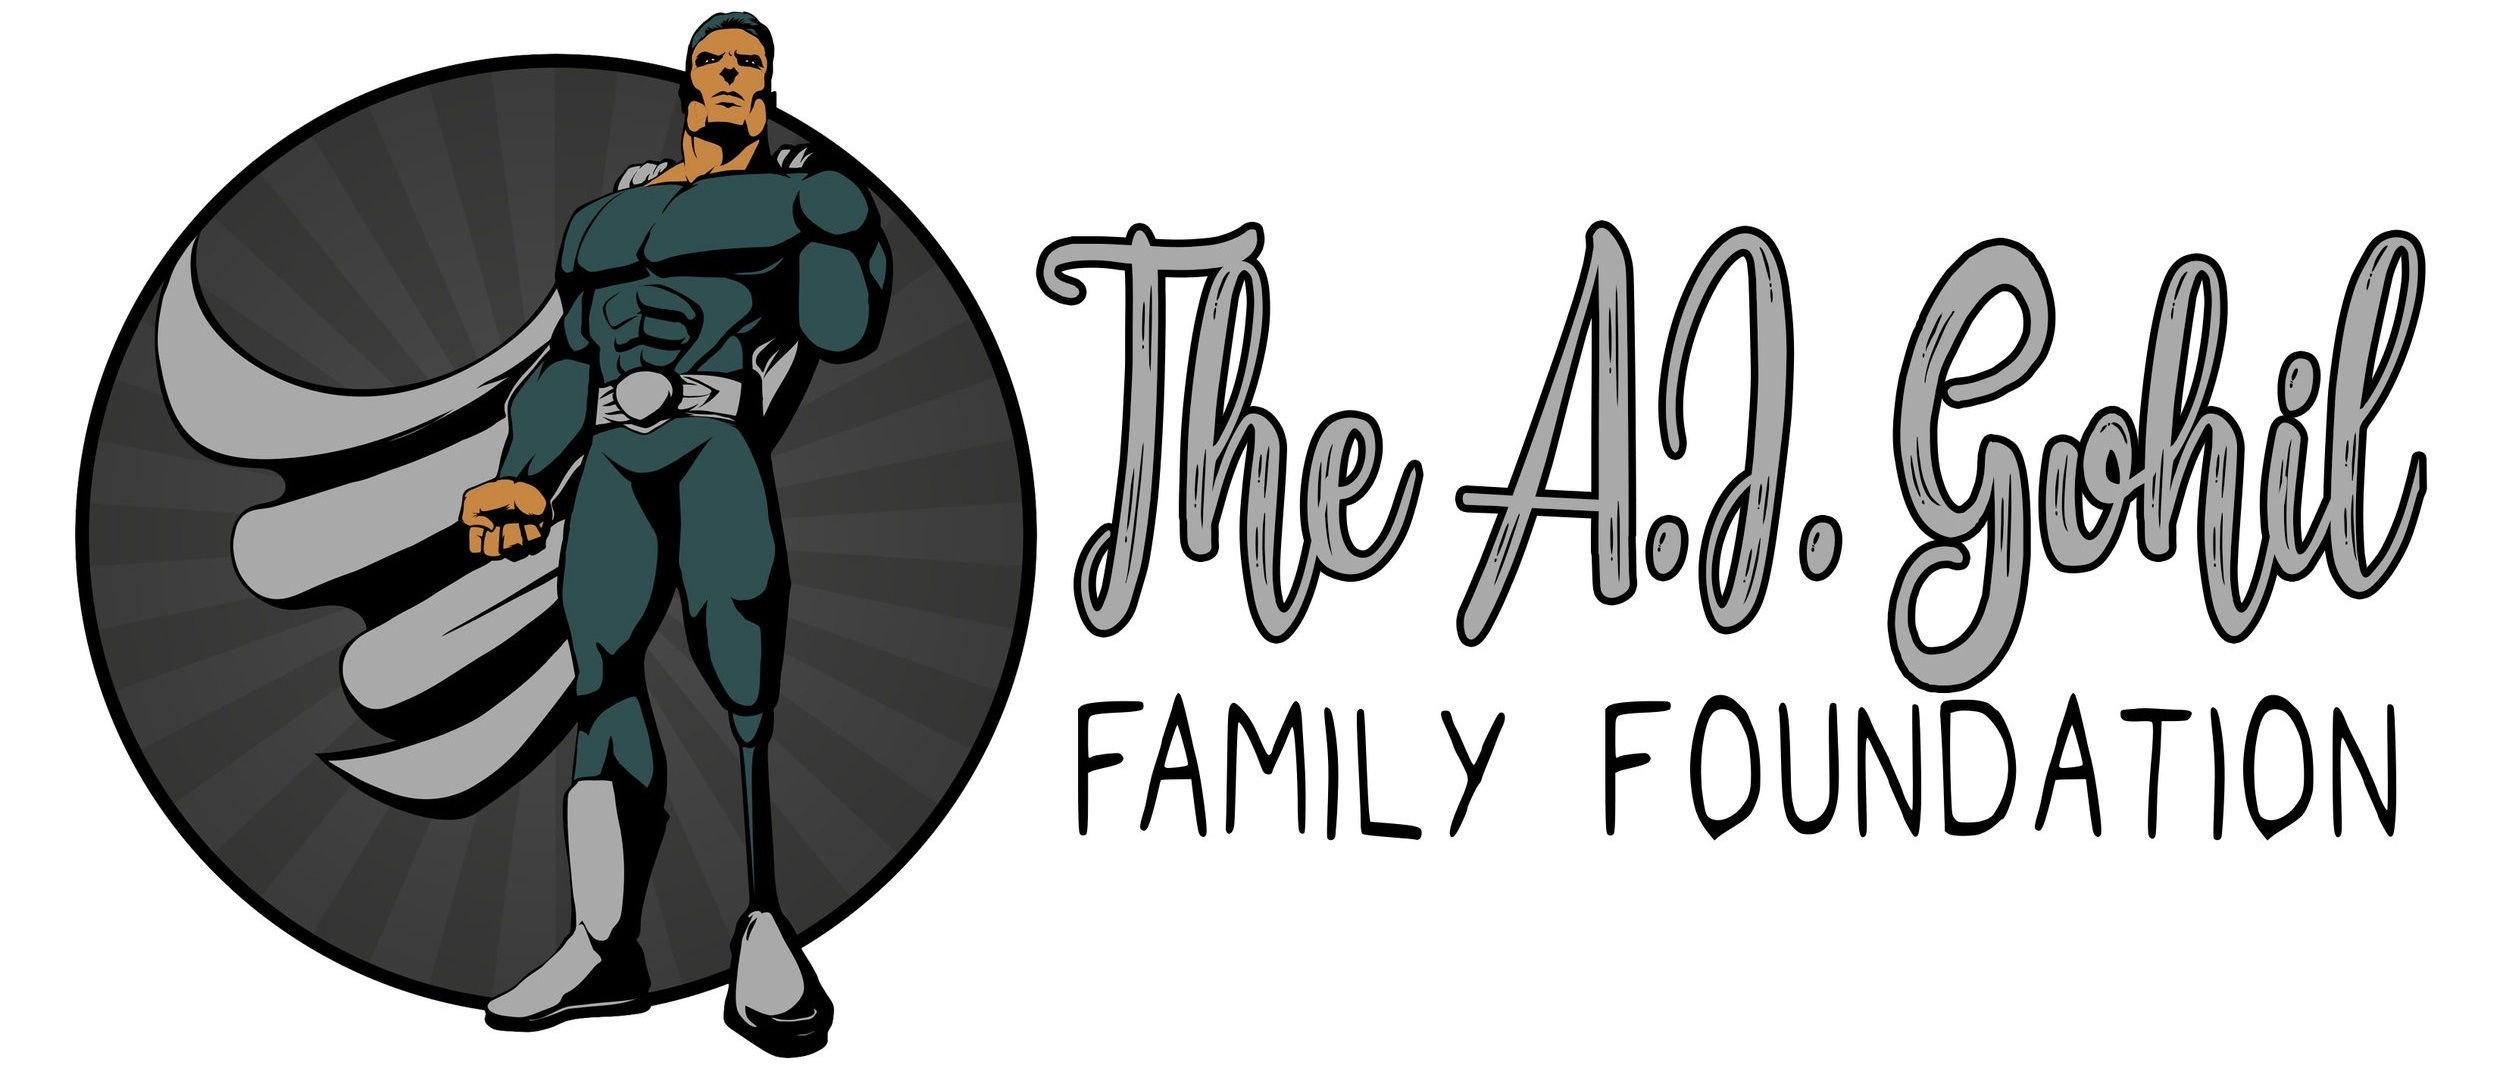 The A.J. Gohil Family Foundation